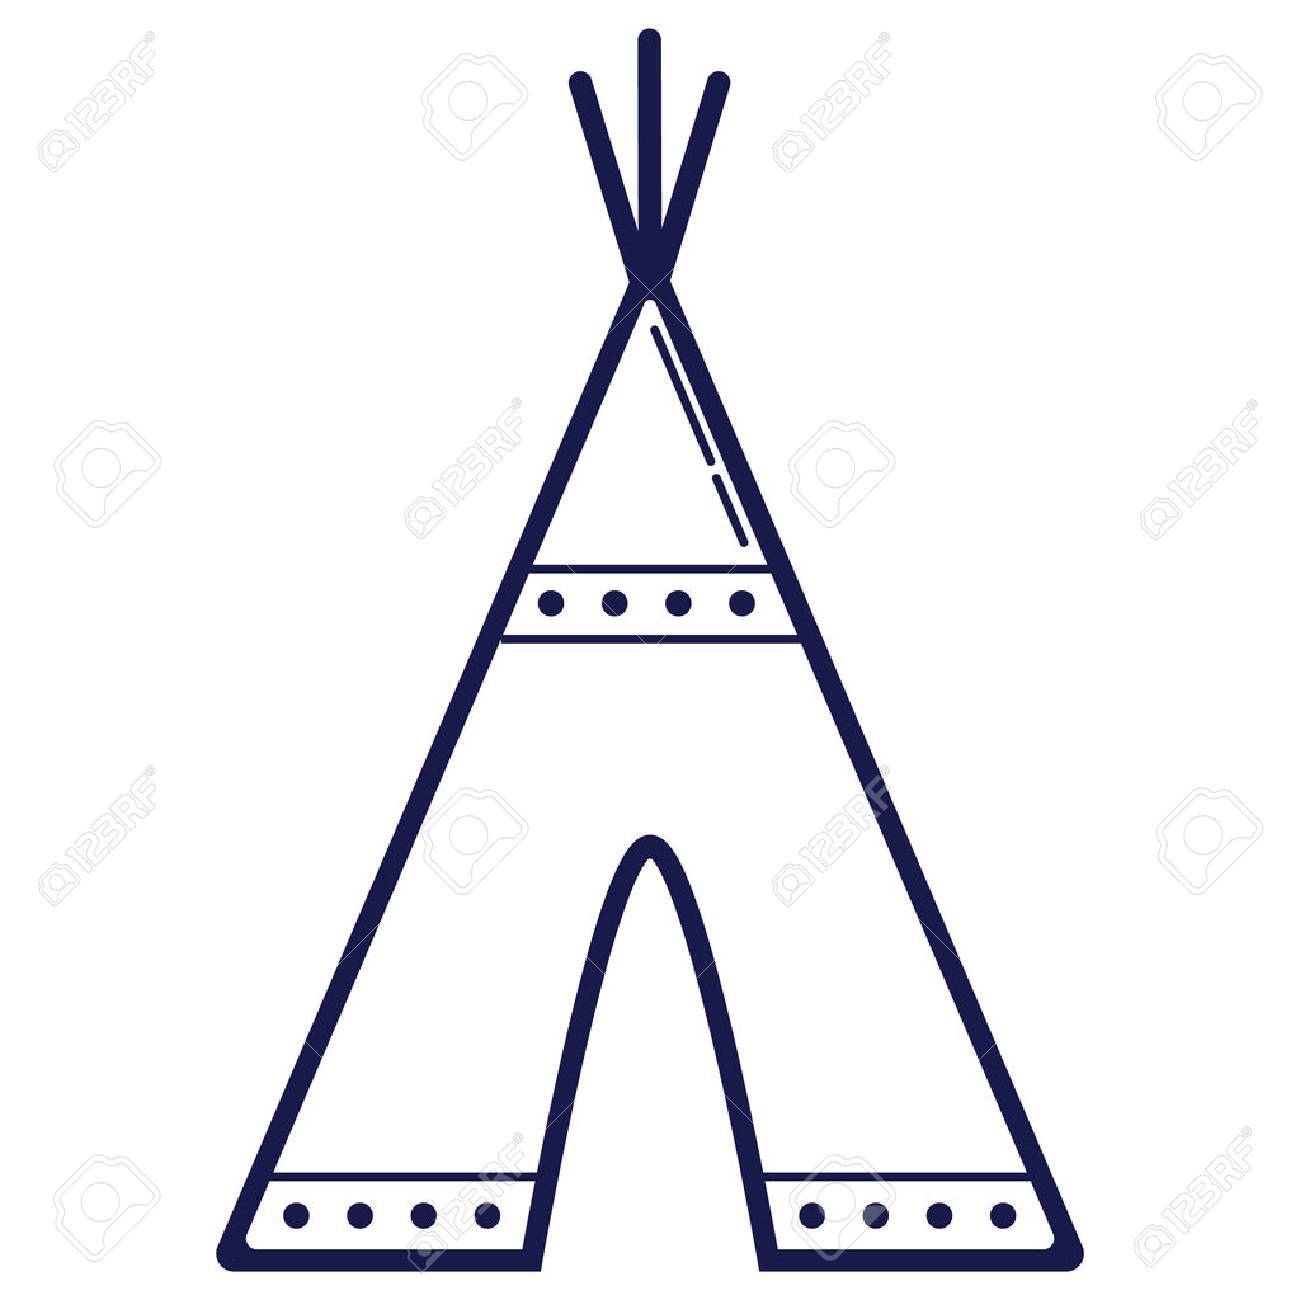 Teepee clipart black and white 2 » Clipart Station.